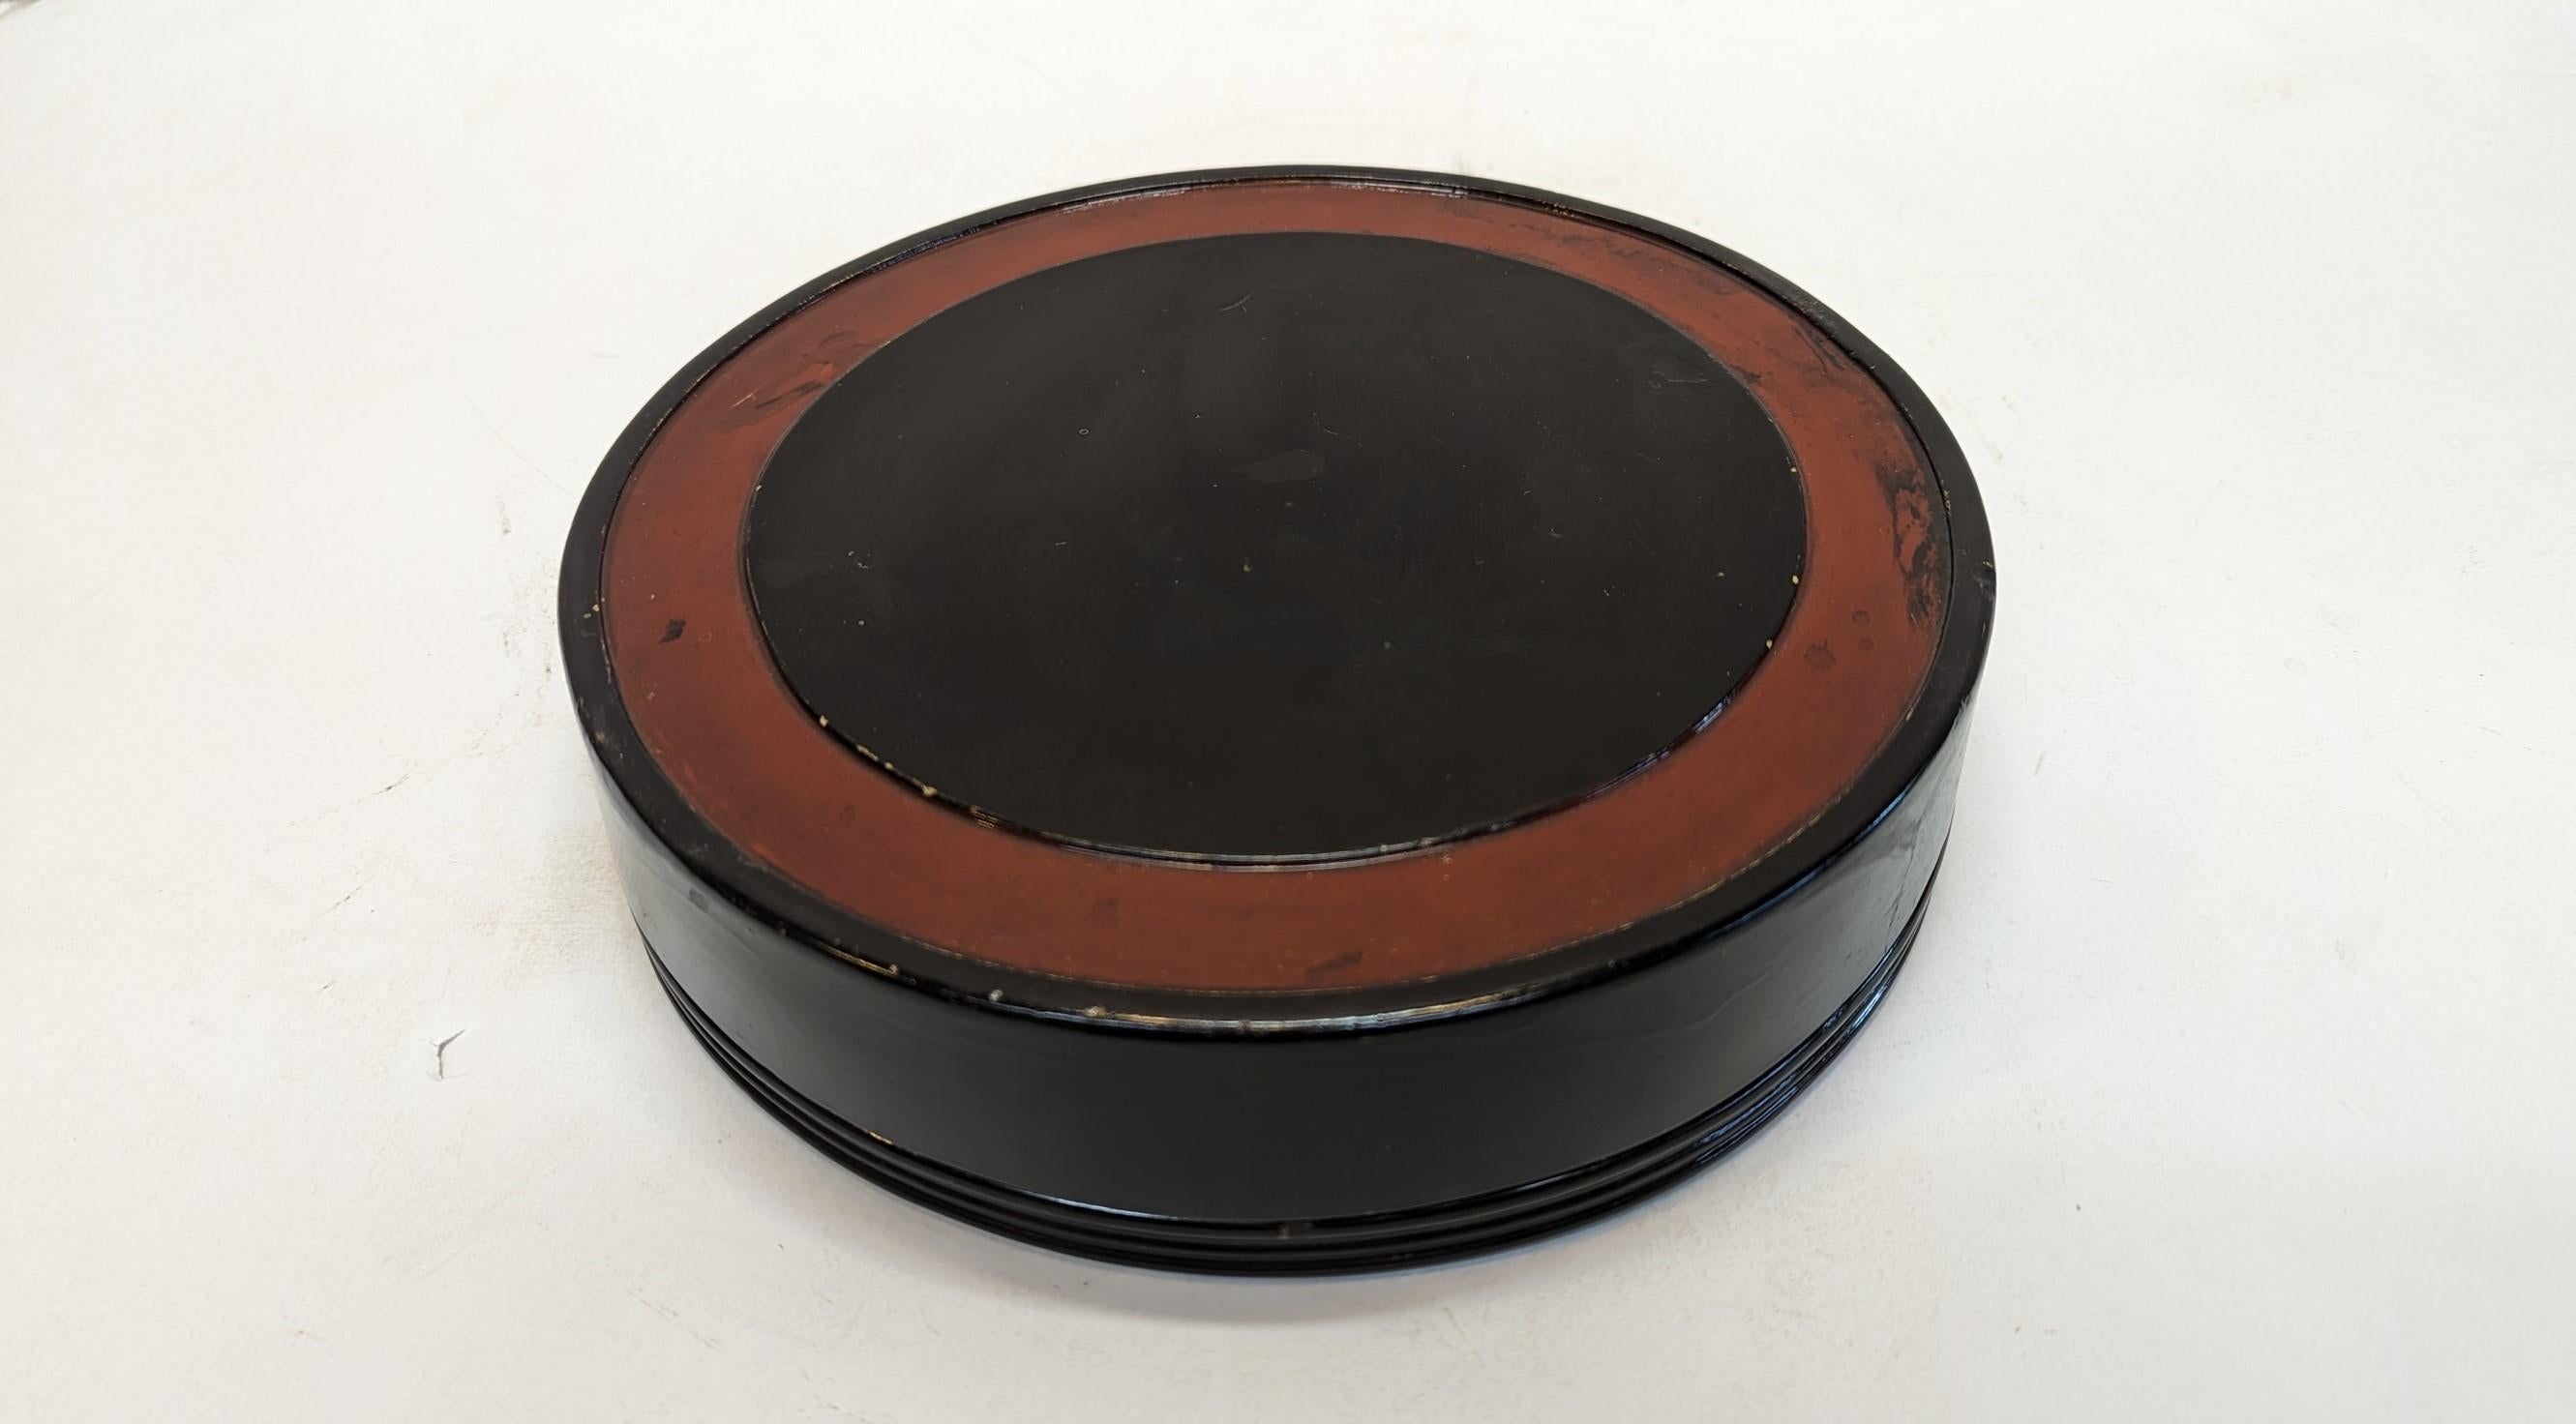 Antique Deco Round Lacquer Box.  Antique Chinese Round Lacquer Box used for special delicate sweets and or holding special jewelry.  Art Deco period in Shanghai, 1920-40.  Constructed wood with gesso and lacquers.  The inside has a star shaped